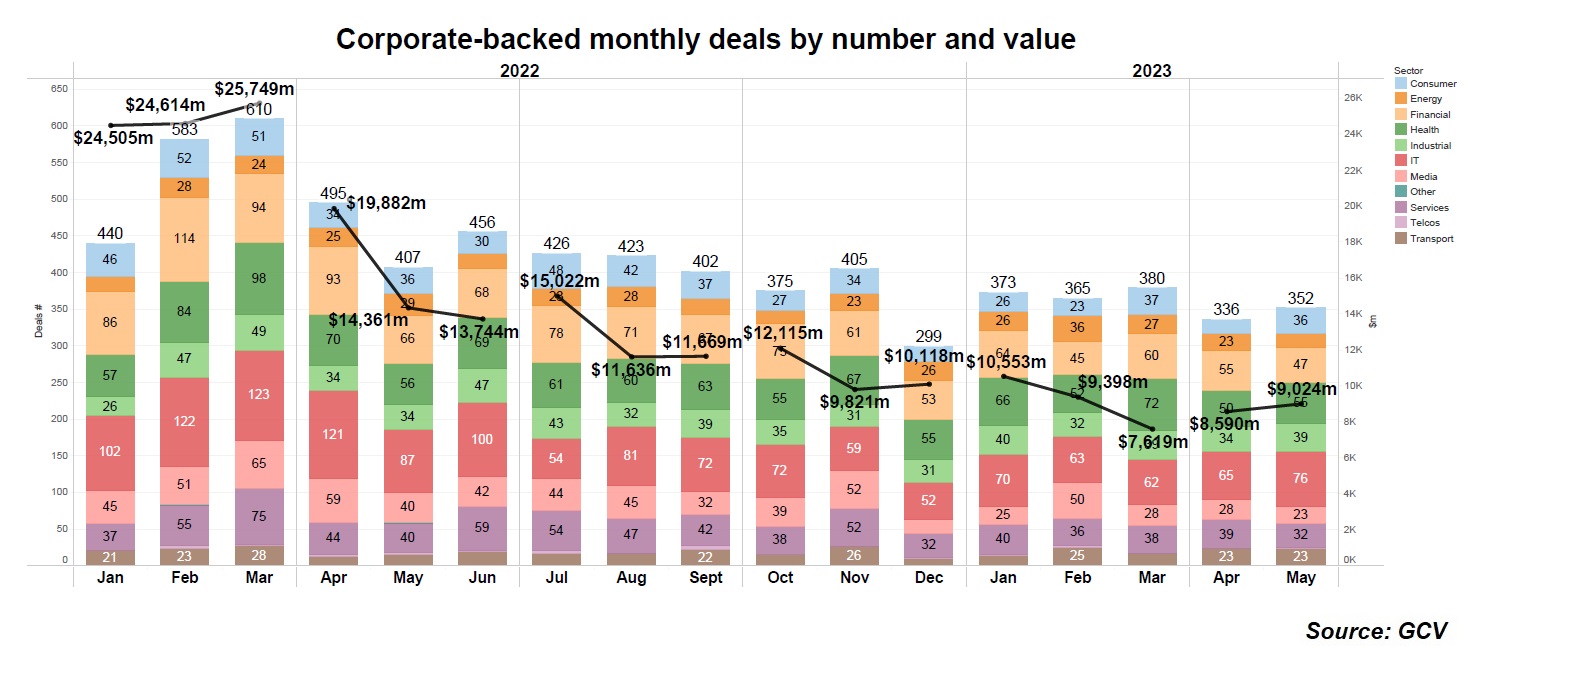 Corporate-backed monthly deals by number and value. Source: GCV